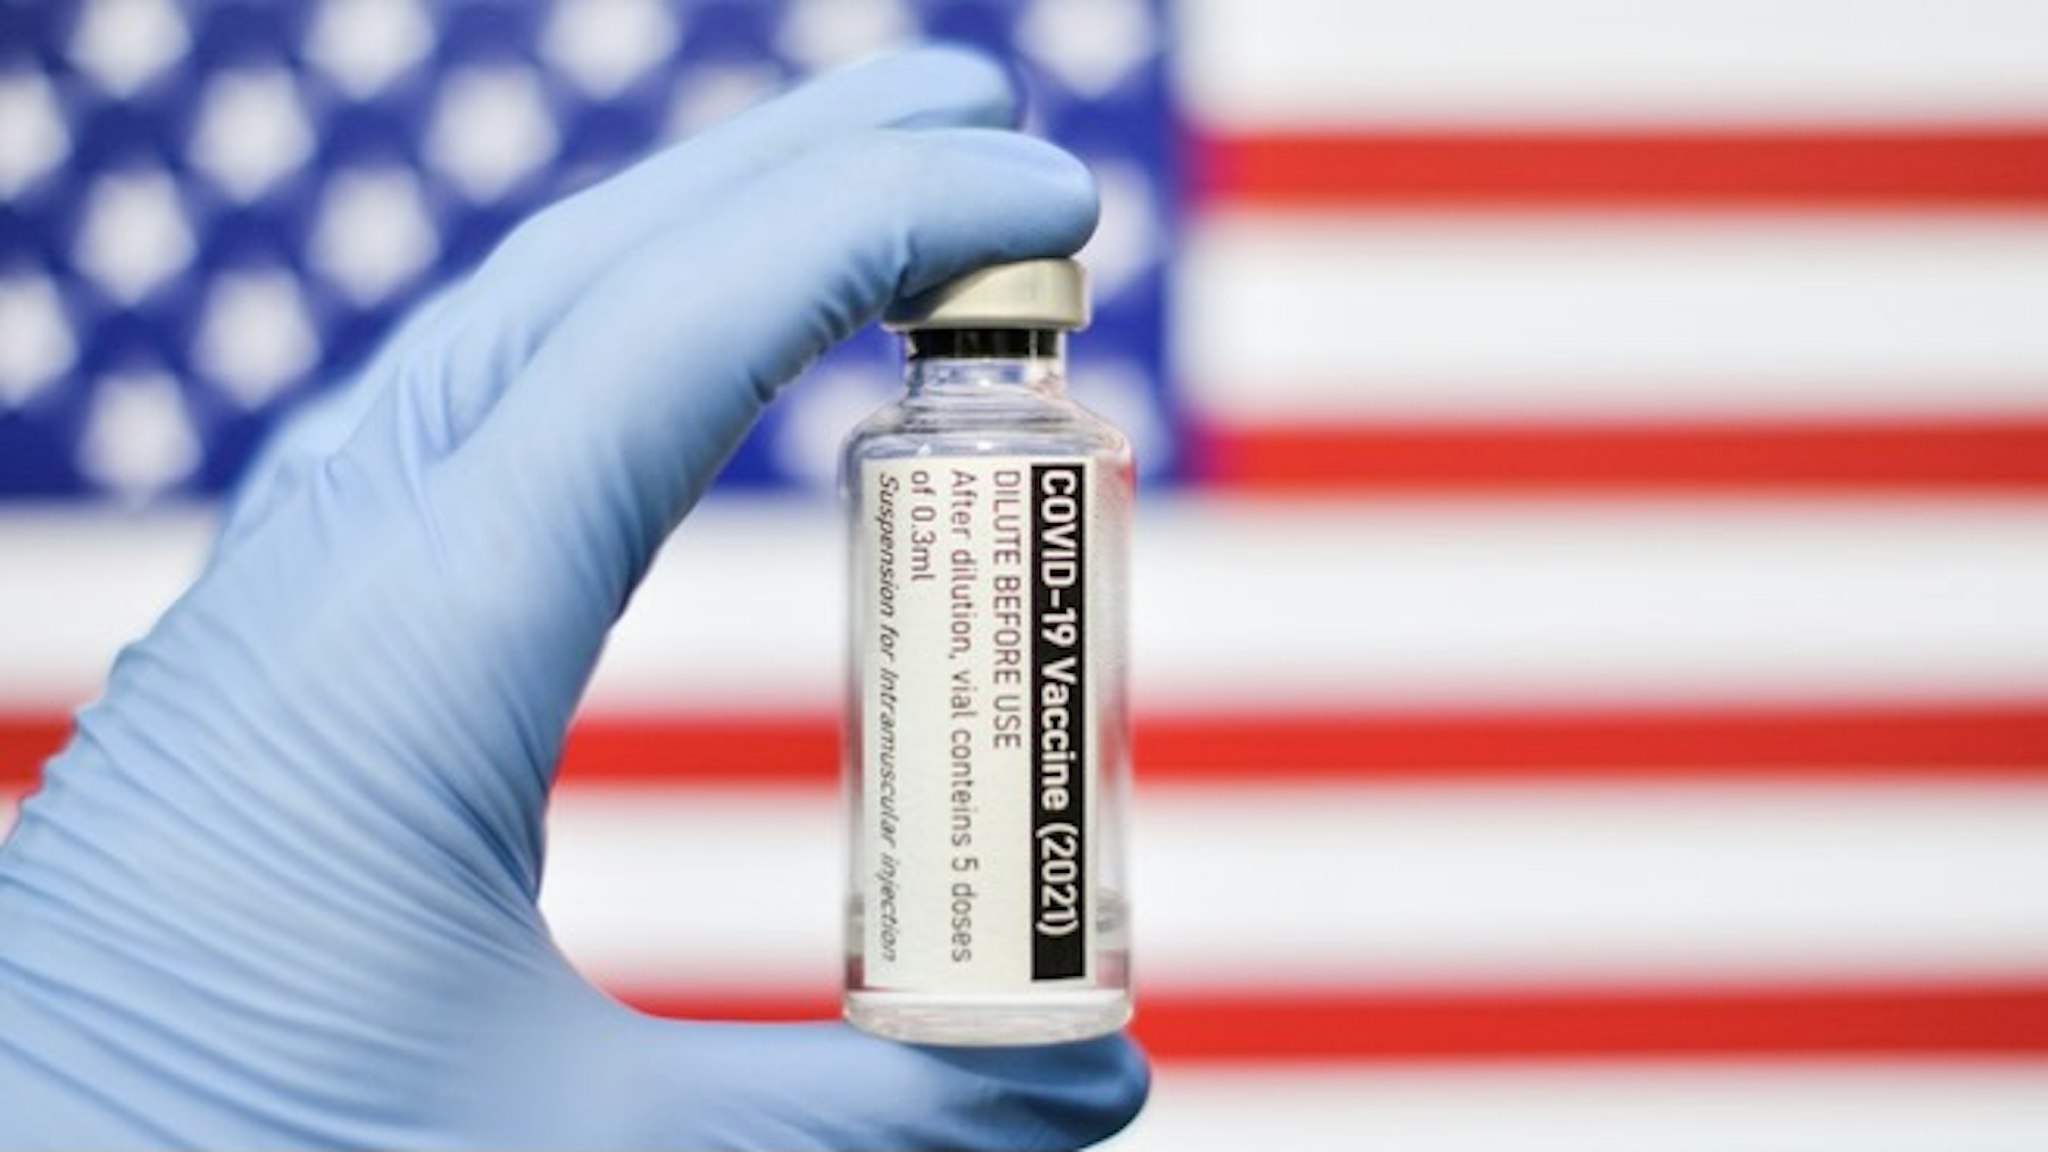 COVID-19 Vaccine on USA Flag. COVID-19 pandemic theme - stock photo Coronavirus Covid-19 concept. Doctor with blue protection medical gloves holds a vaccine bottle. coronavirus covid 19 vaccine research